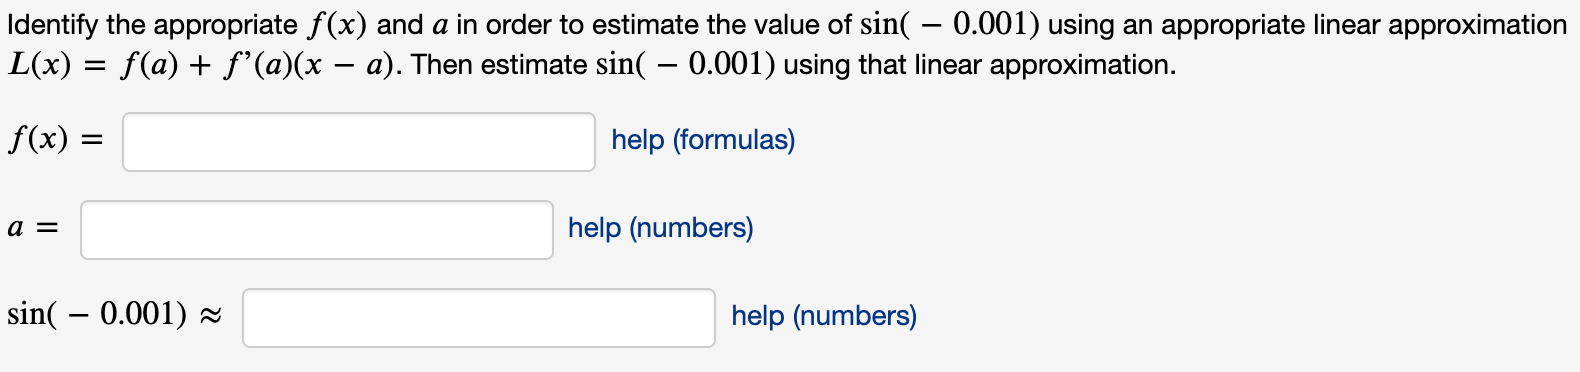 Identify the appropriate f(x) and a in order to estimate the value of sin( – 0.001) using an appropriate linear approximatio
L(x) = f(a) + f'(a)(x – a). Then estimate sin( – 0.001) using that linear approximation.
f(x) =
help (formulas)
a =
help (numbers)
sin( – 0.001) z
help (numbers)
